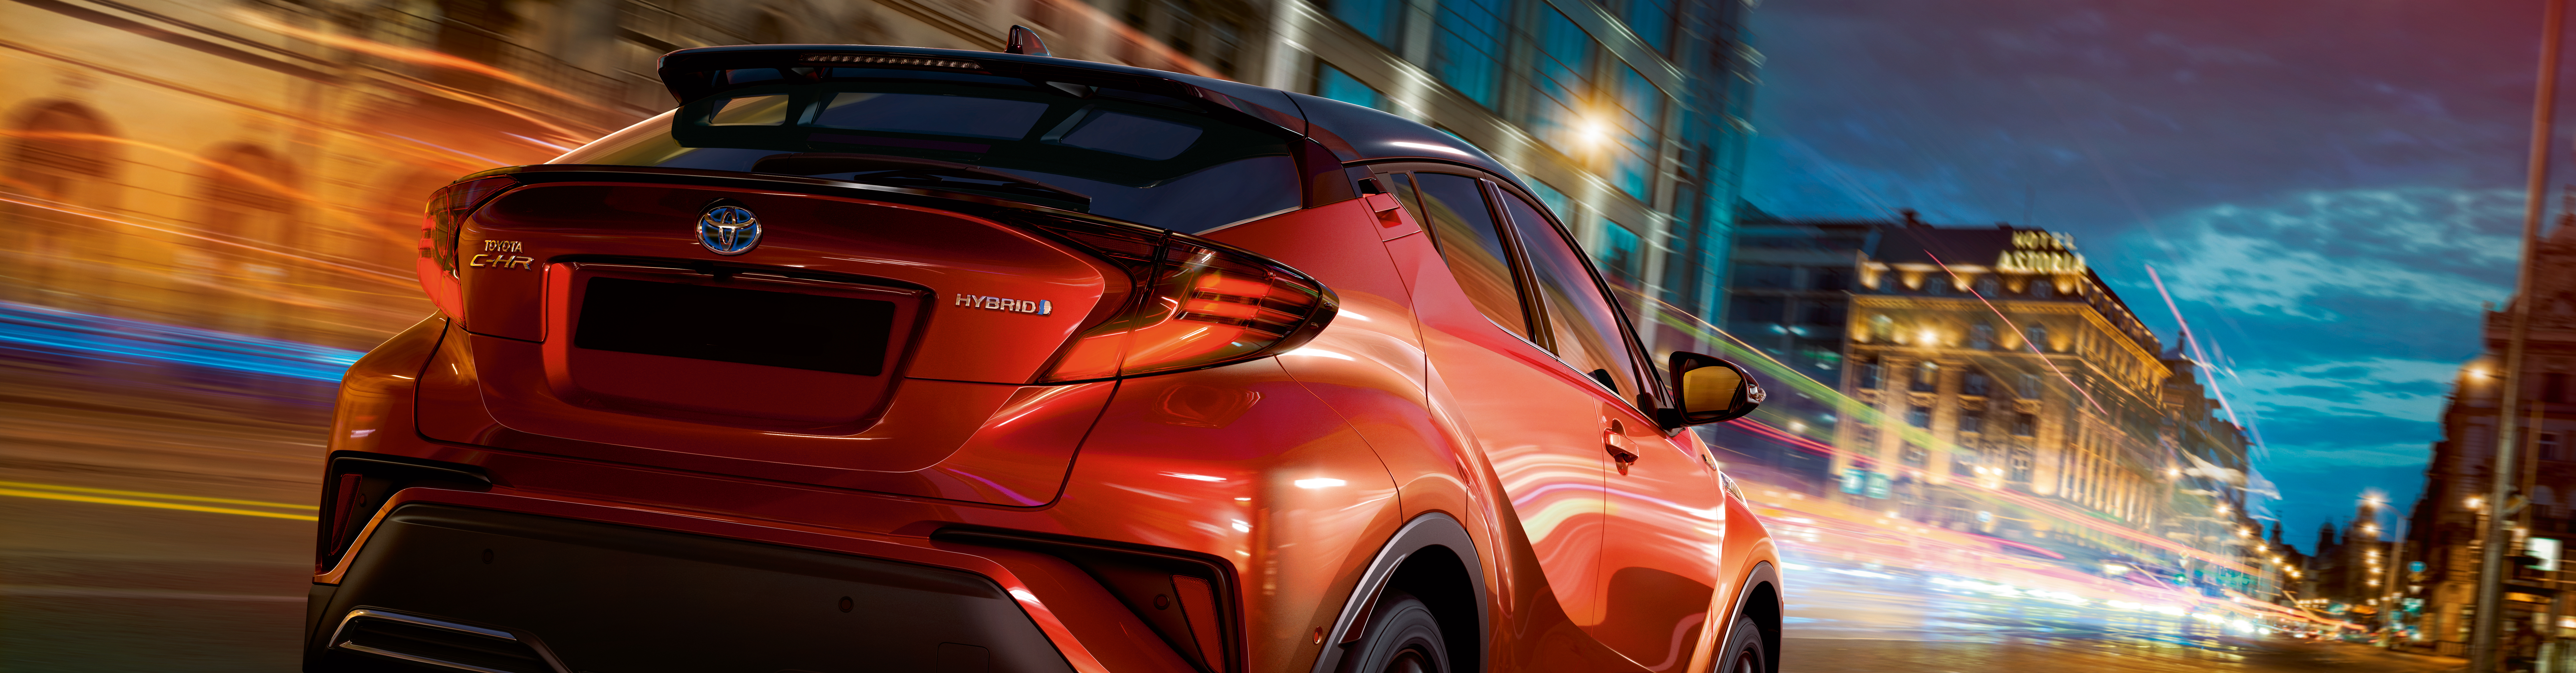 Drive a new Toyota C-HR with KINTO Flex, the all inclusive car subscription